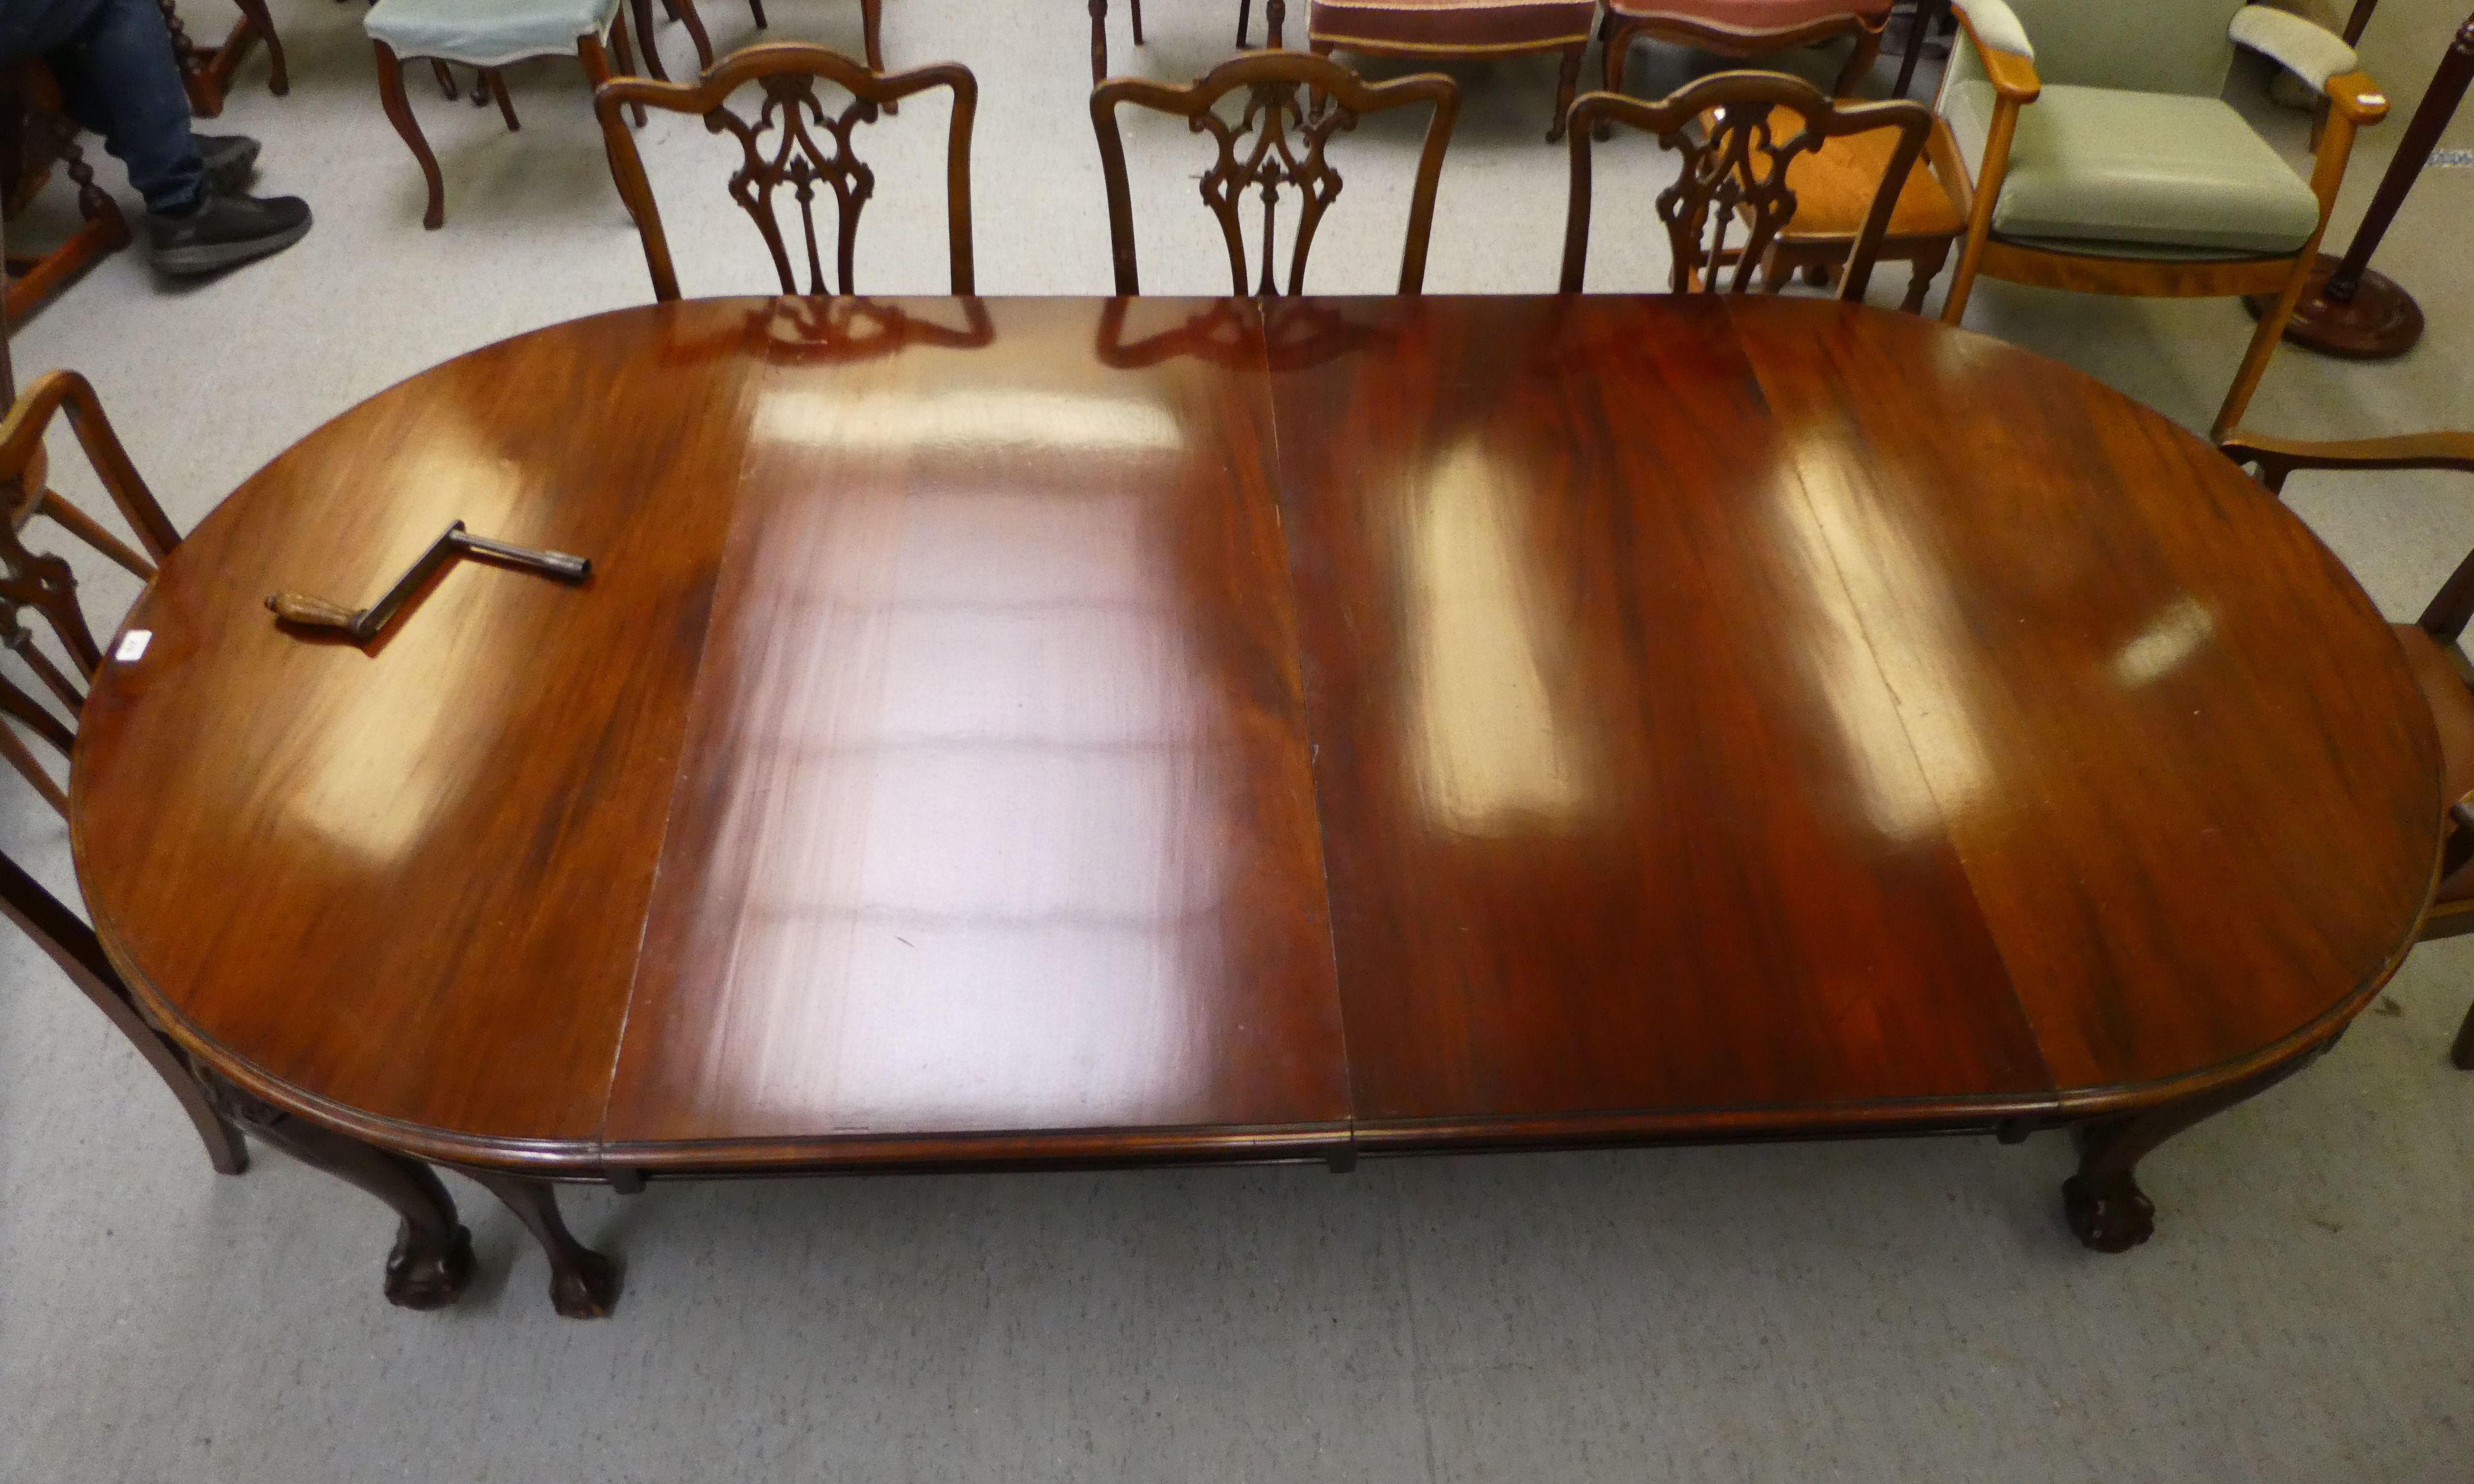 A 1920s mahogany wind-out dining table, raised on cabriole legs, talon and ball feet  29"h  46"L - Image 2 of 5